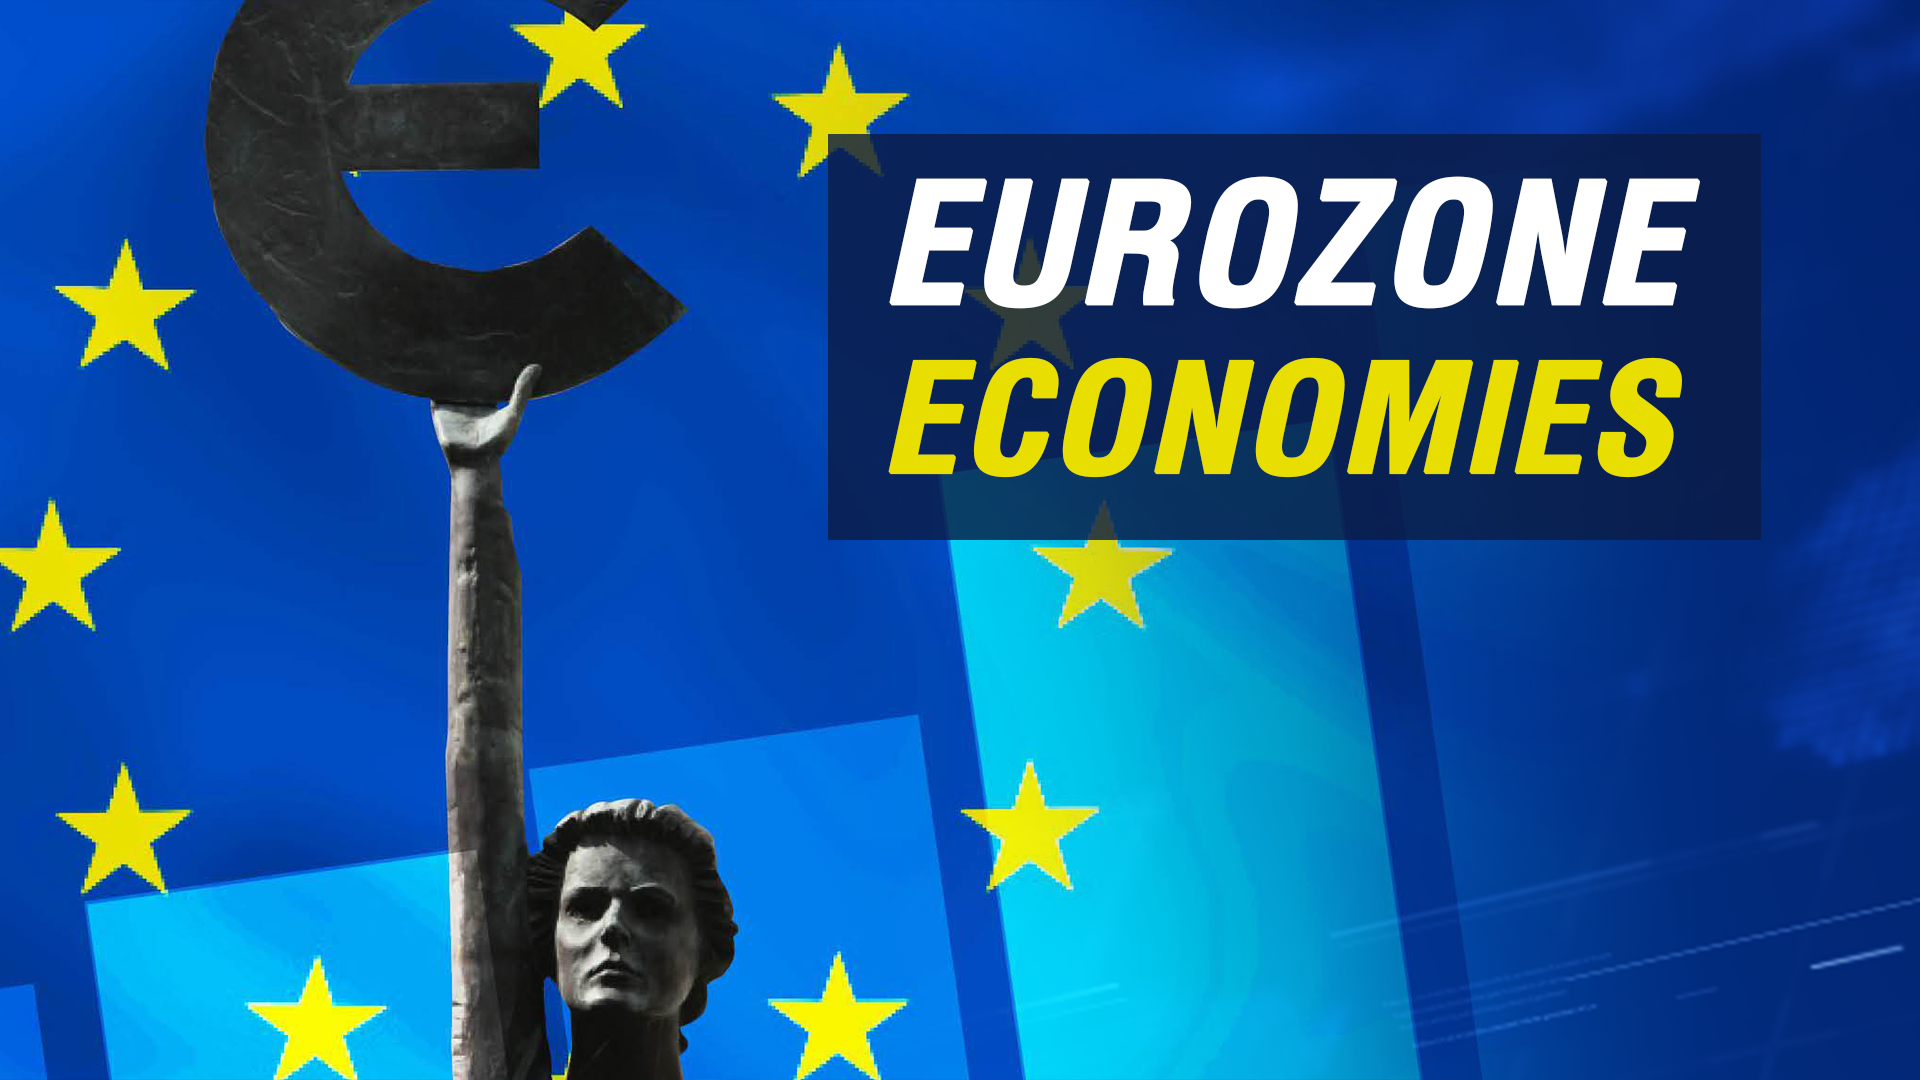 European economic crisis: inflation and rising energy prices